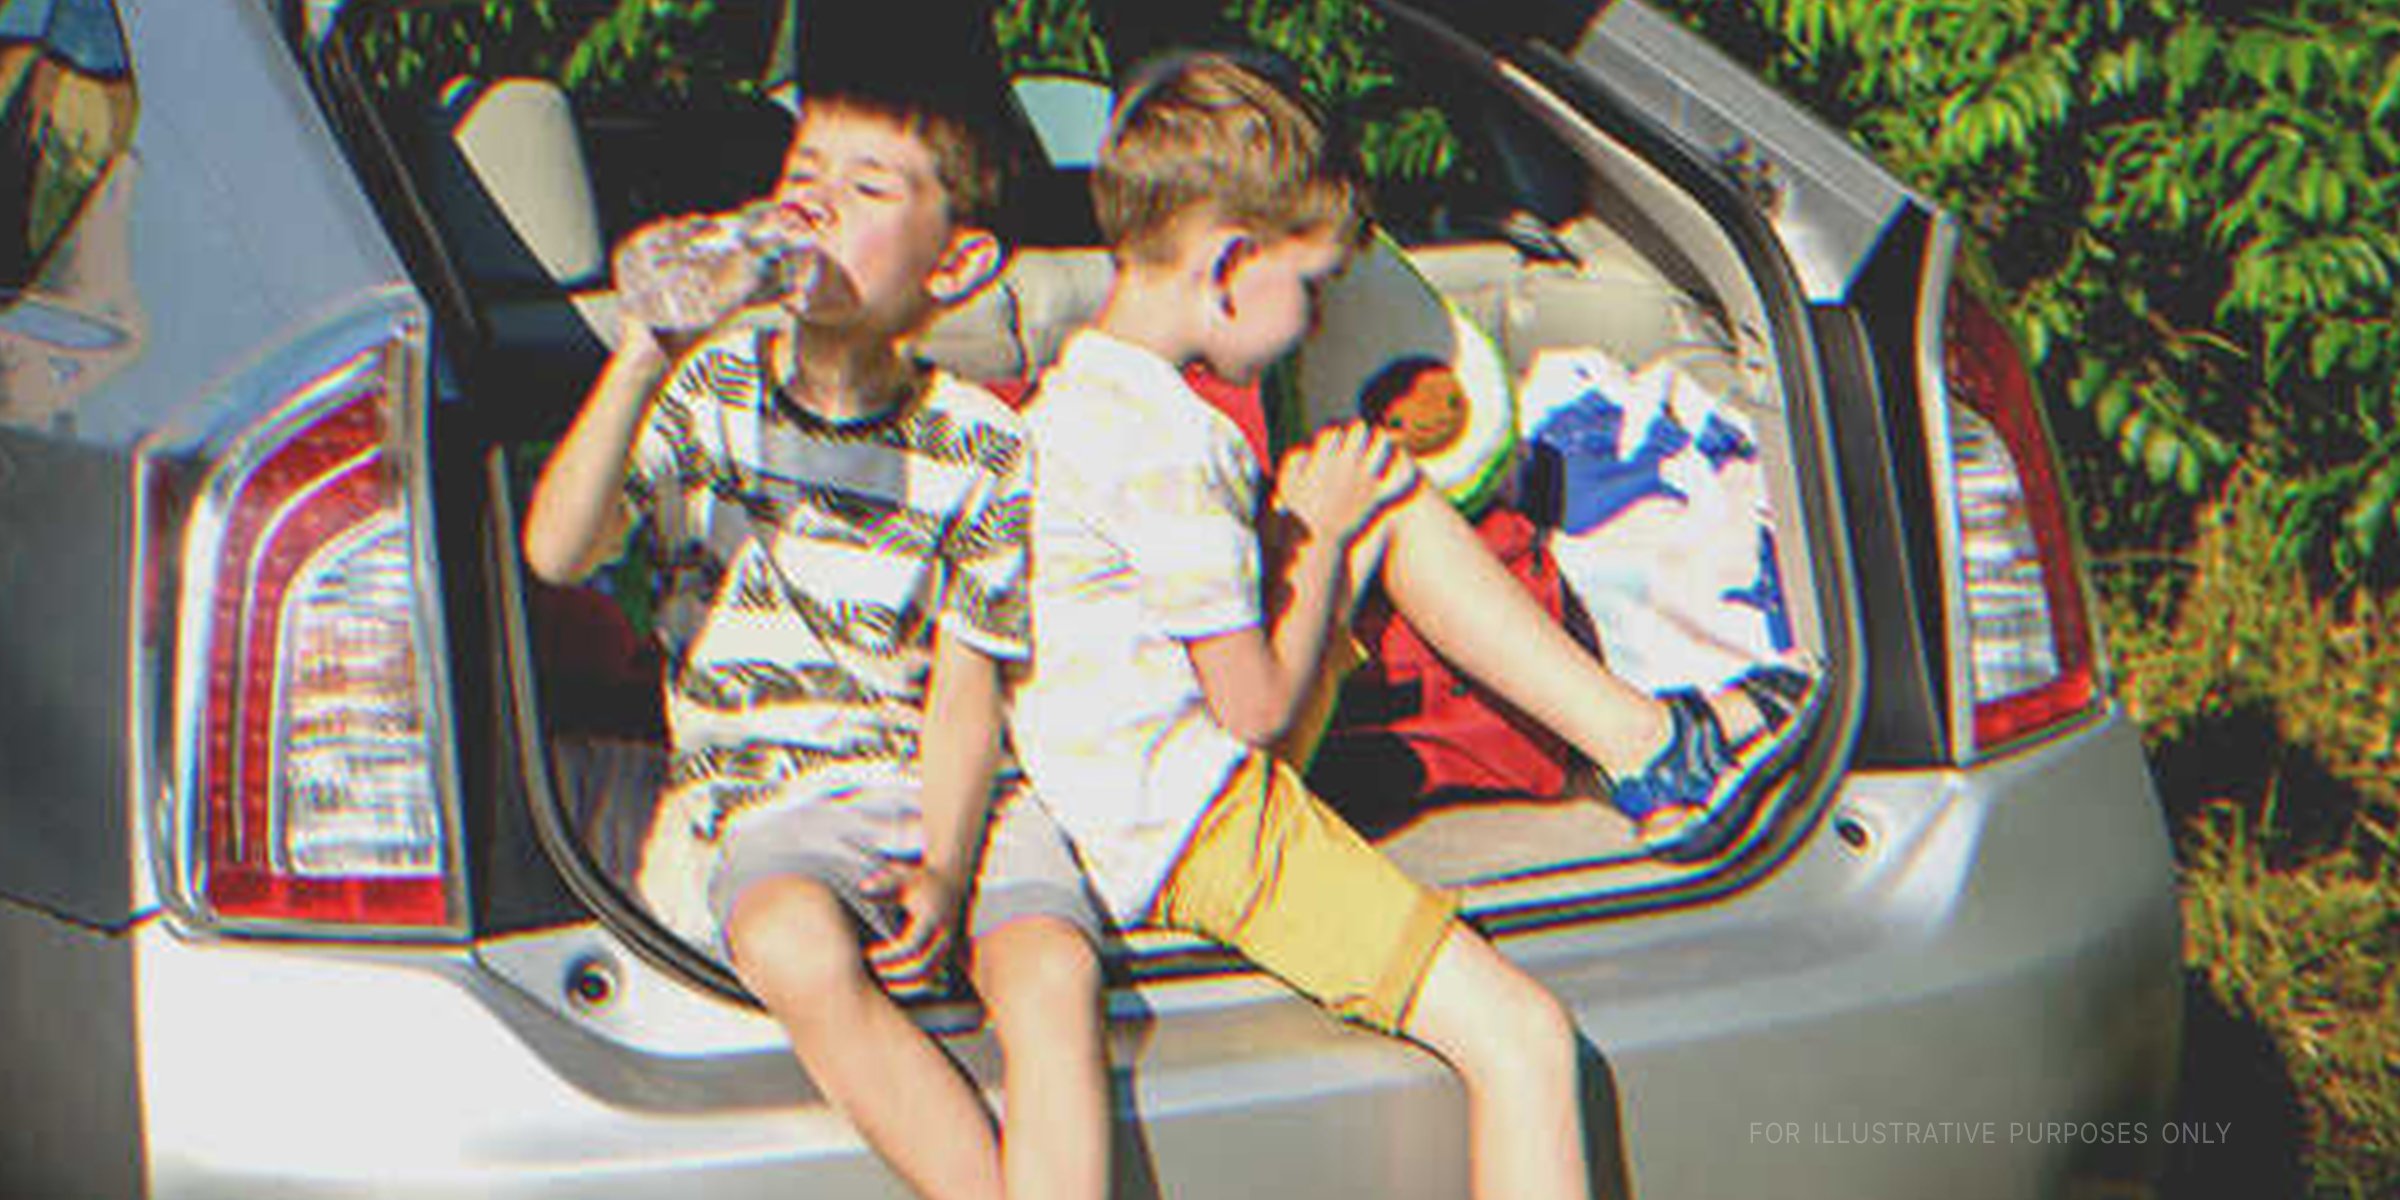 Two boys sitting in a car trunk | Source: Shutterstock